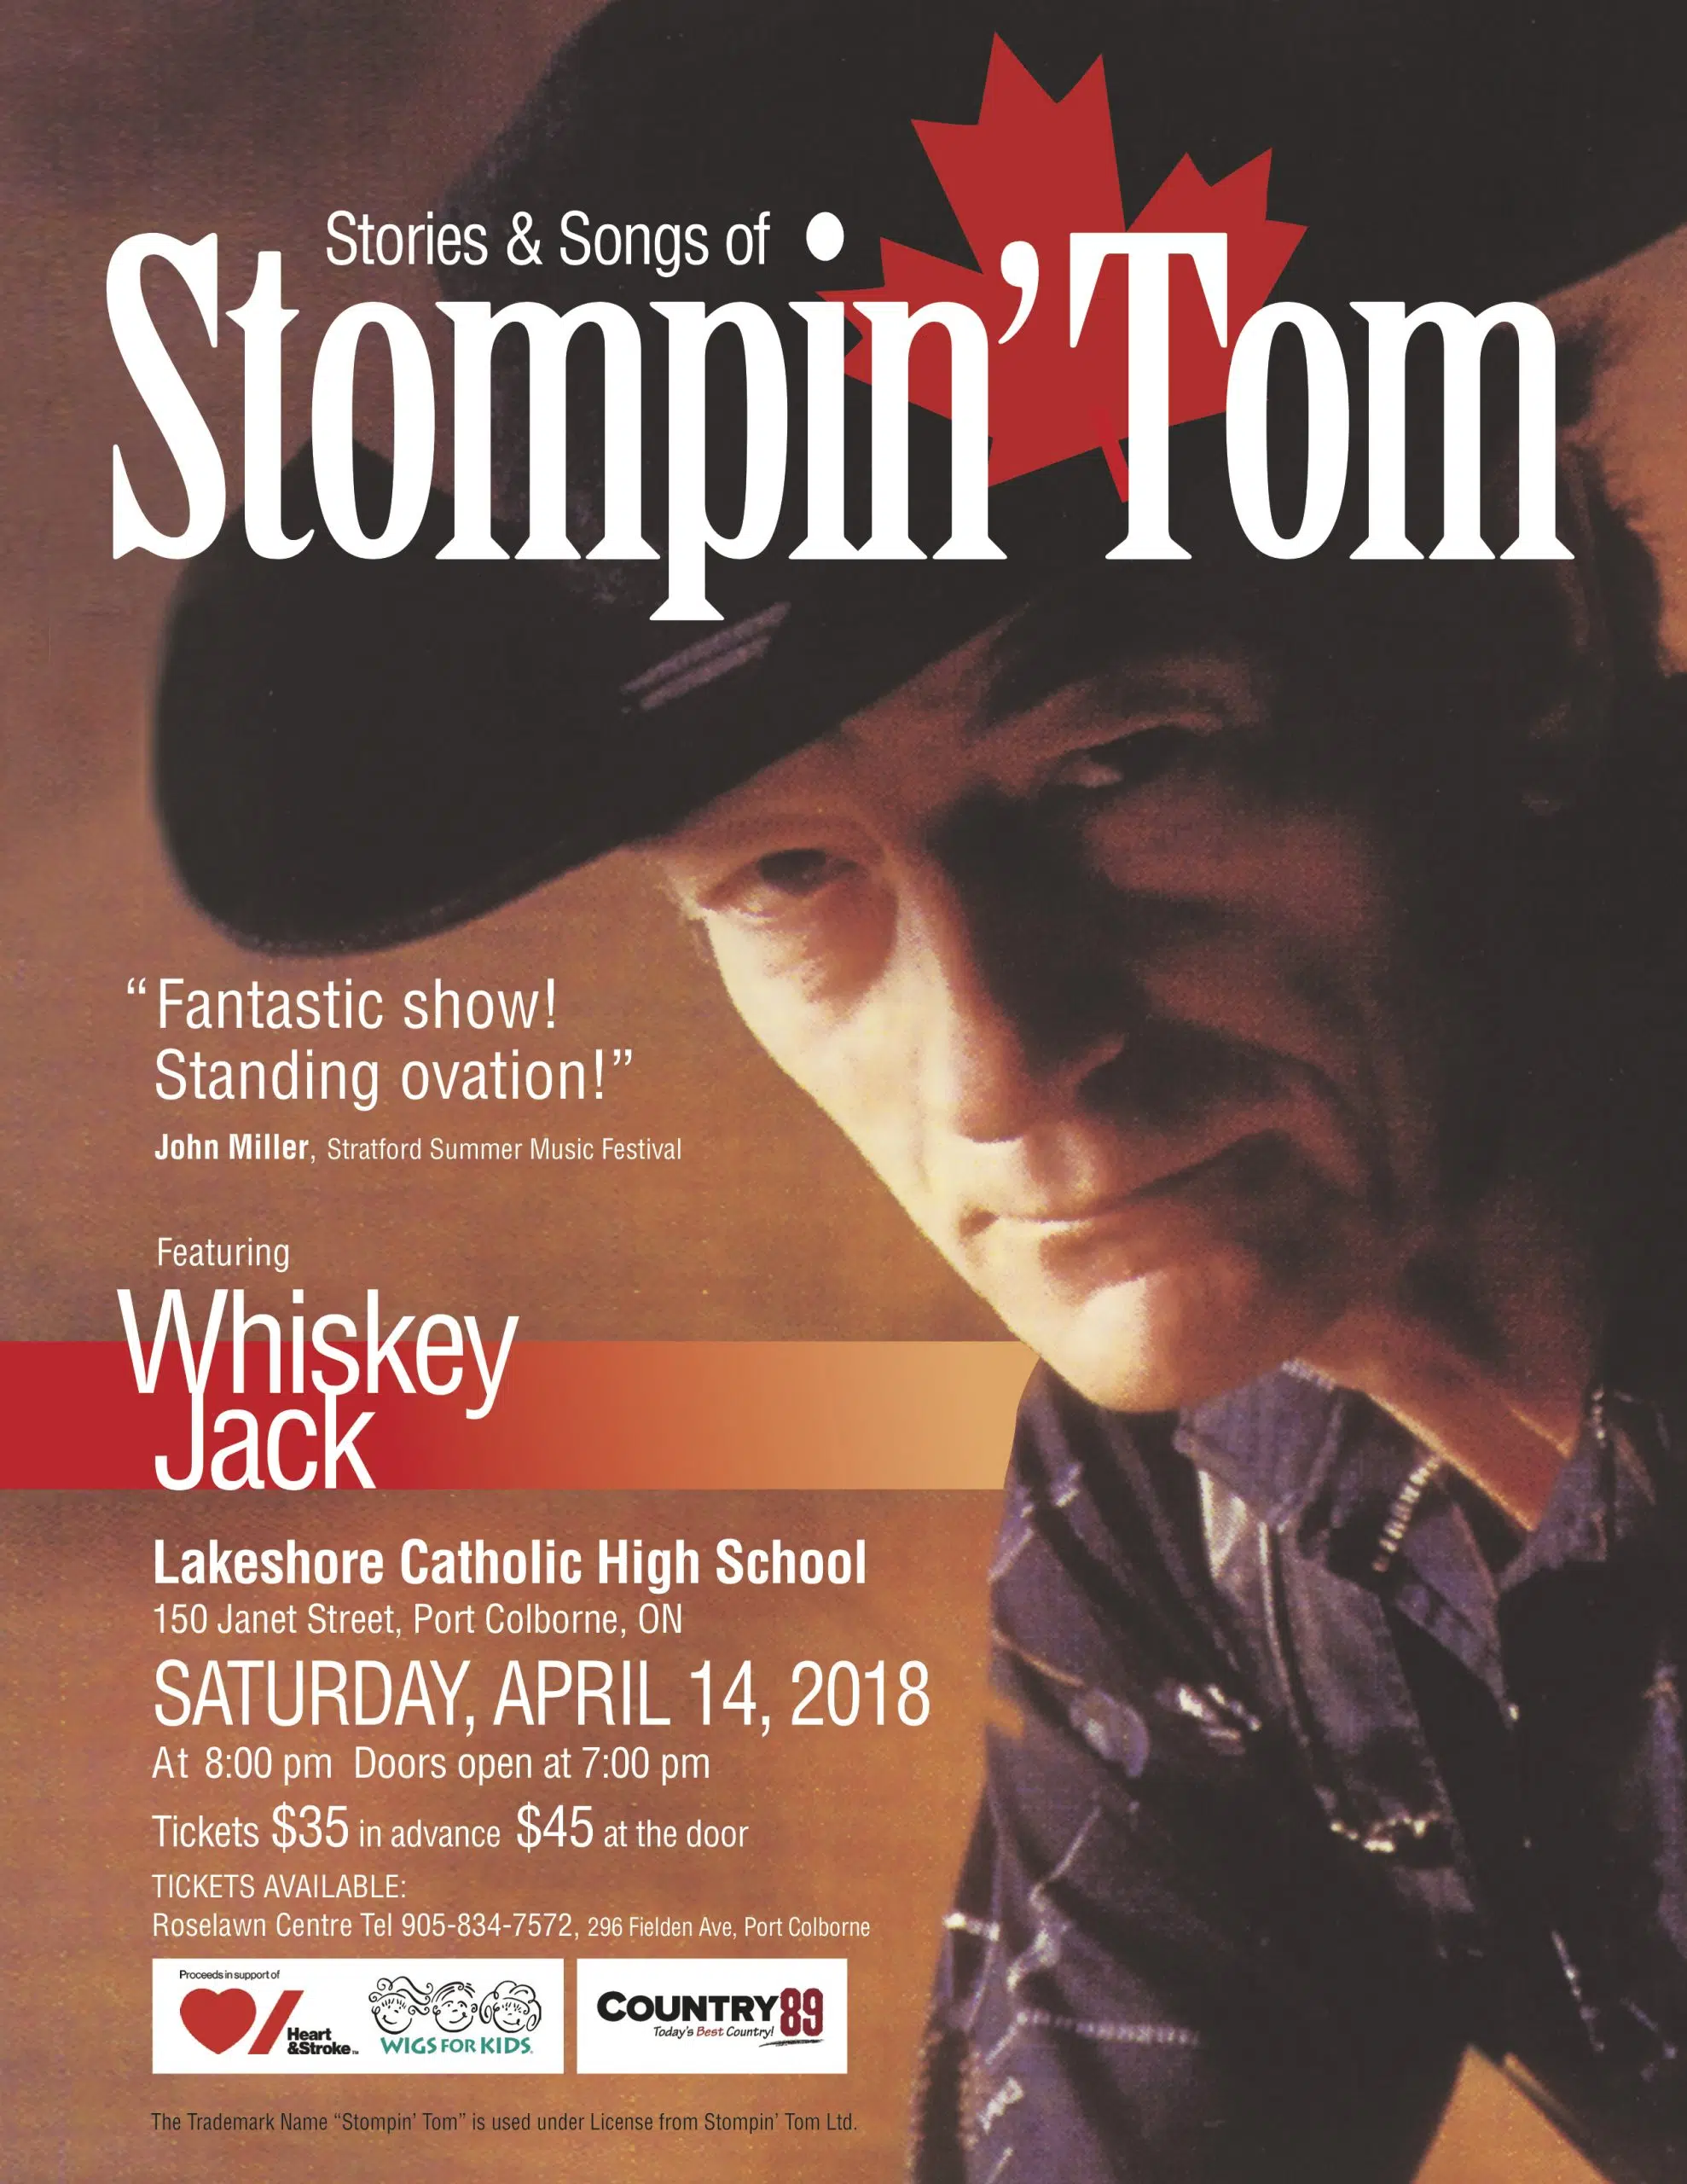 We’re sending You to Whisky Jack’s “Stompin’ Tom” Fundraiser!